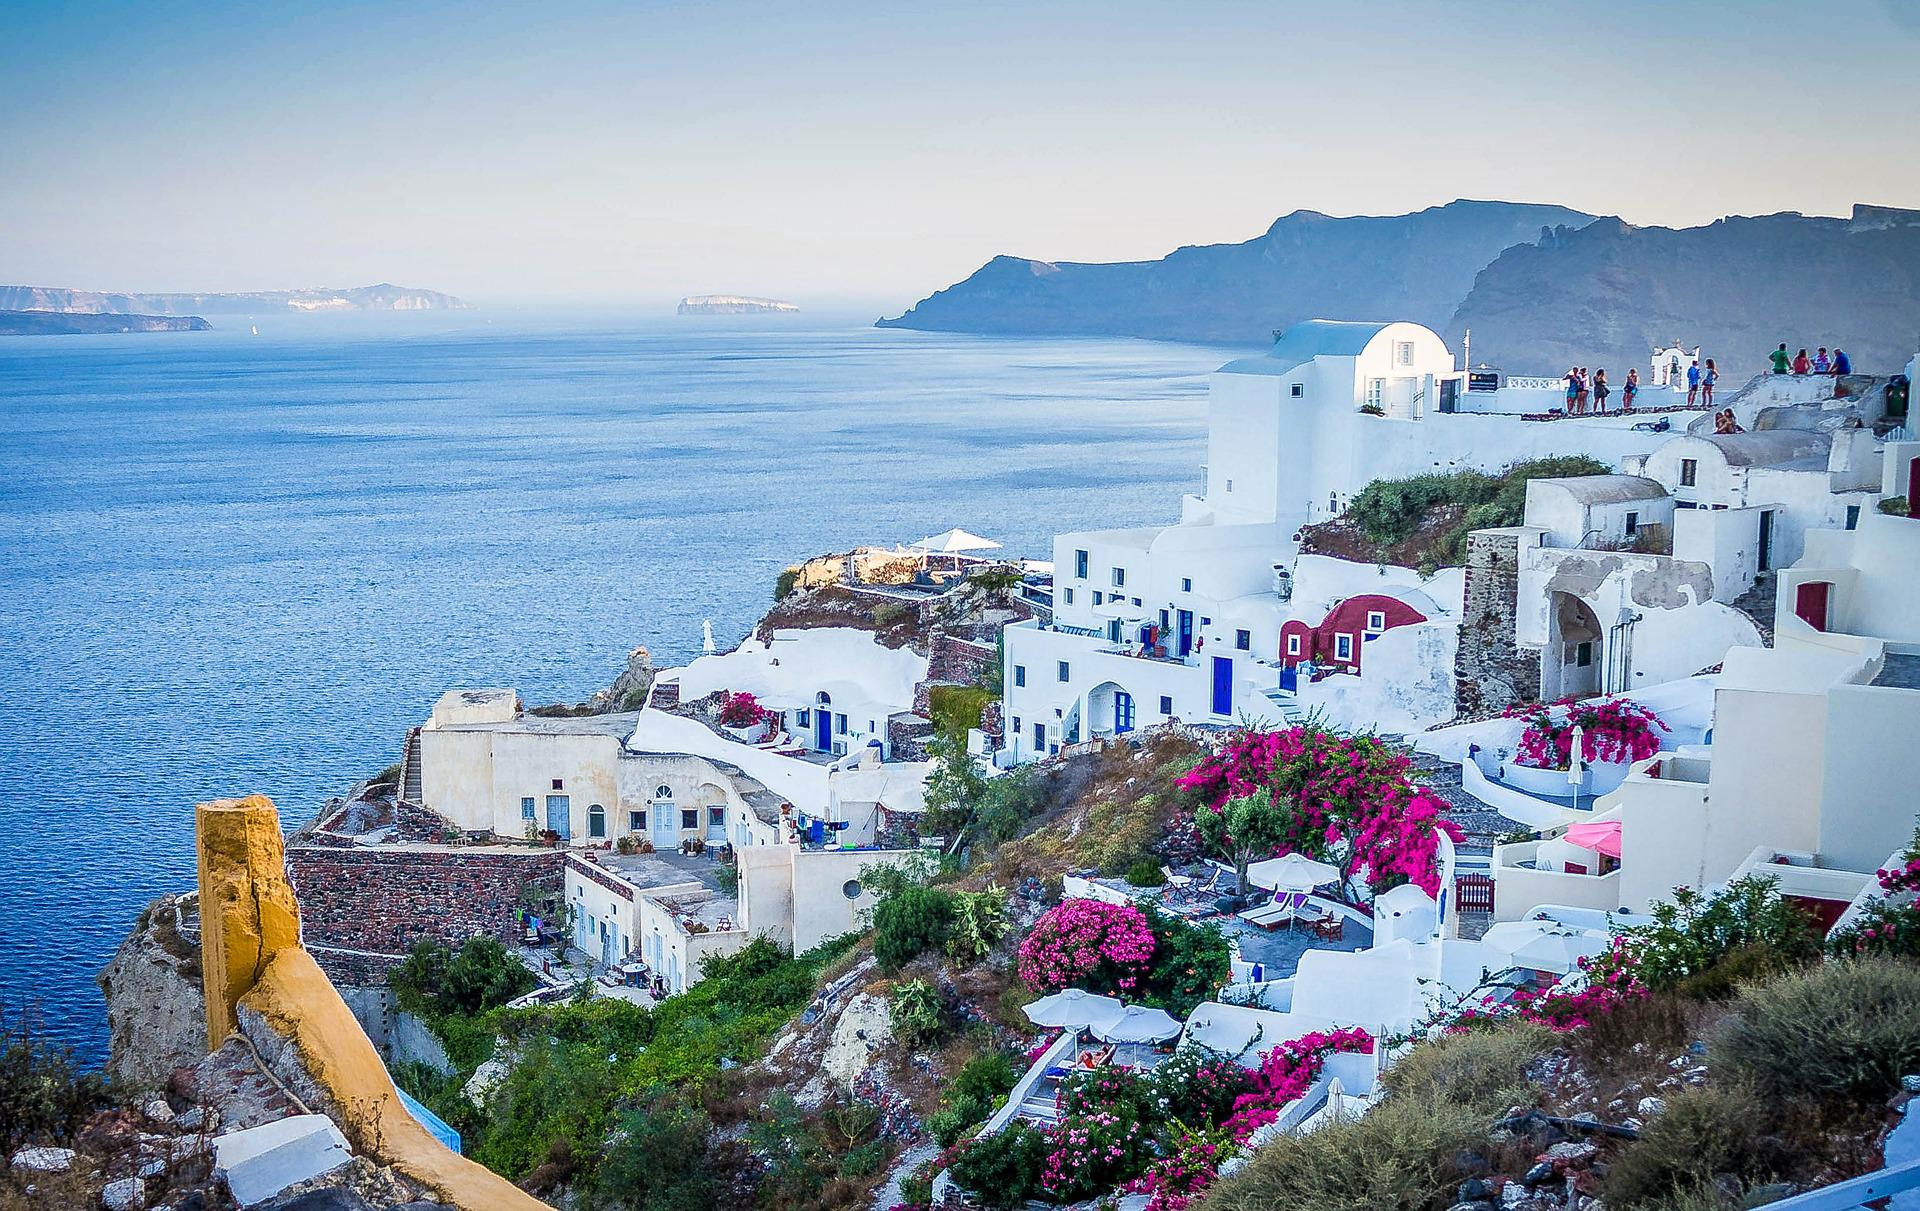 Real Estate: They came to the Greek islands as tourists and ended up as investors